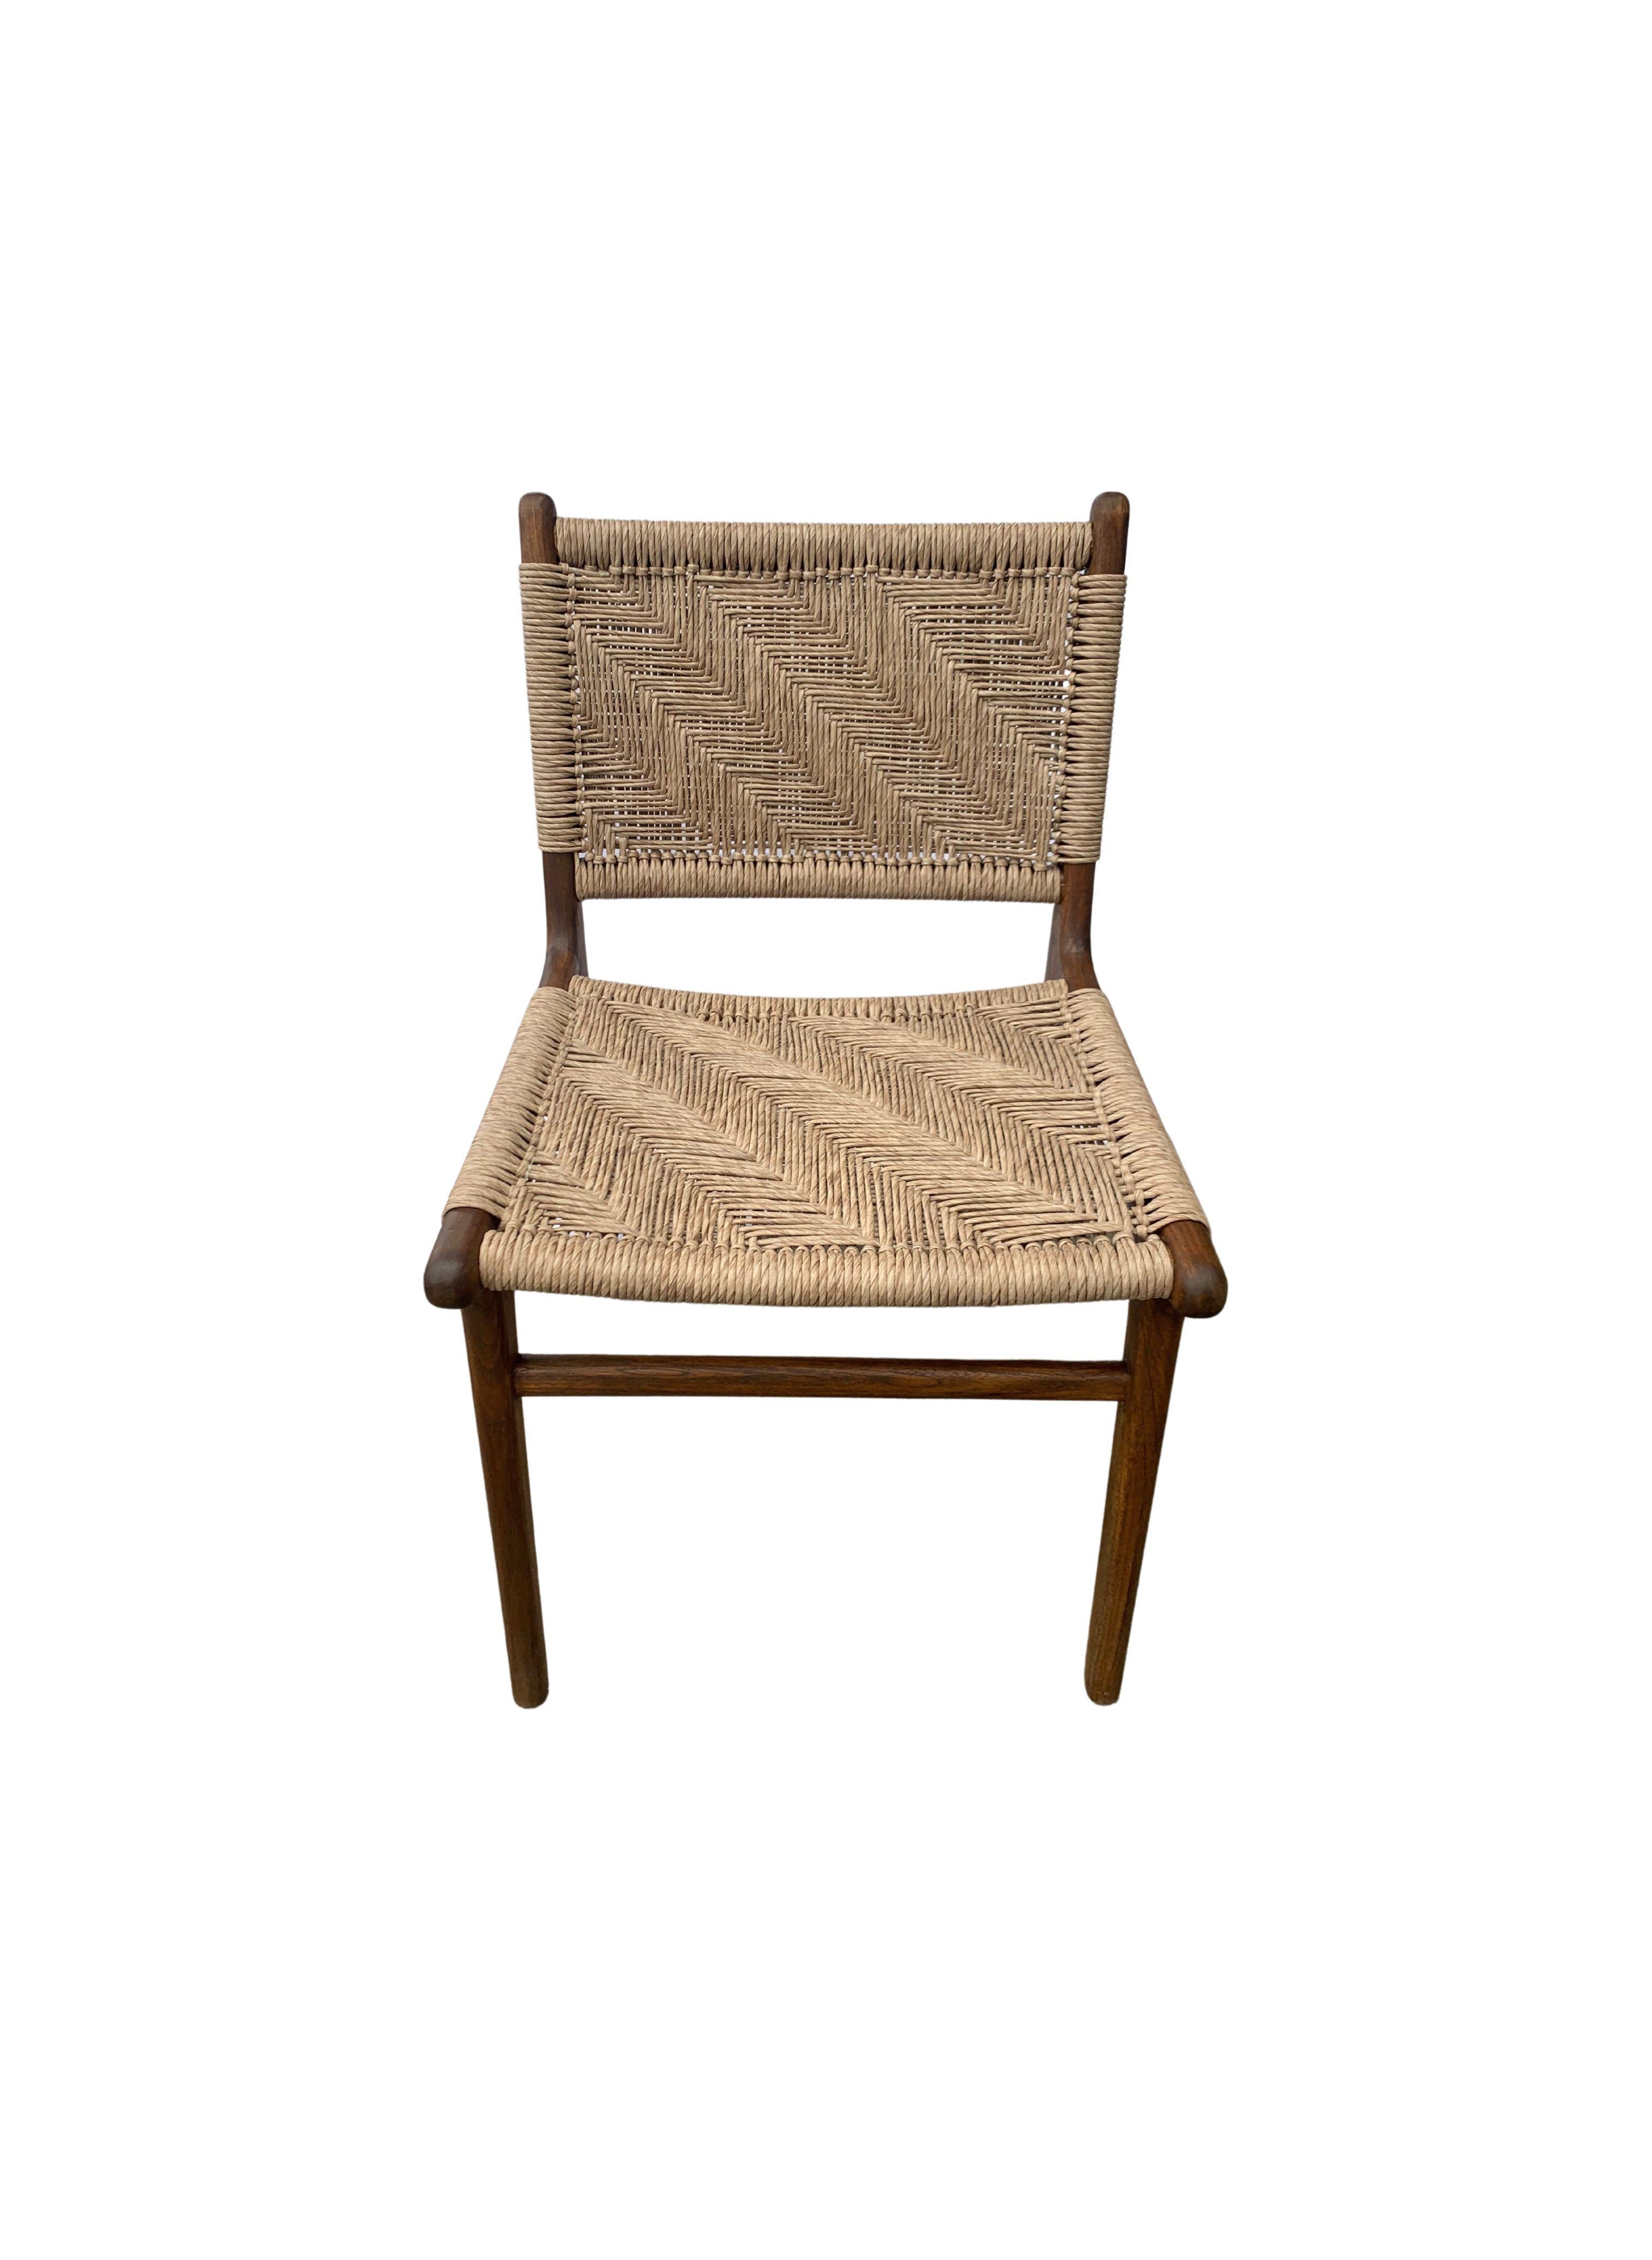 Hand-Crafted Teak Wood Framed Chair with Woven Synthetic Rattan Seat, Dark Wood Finish